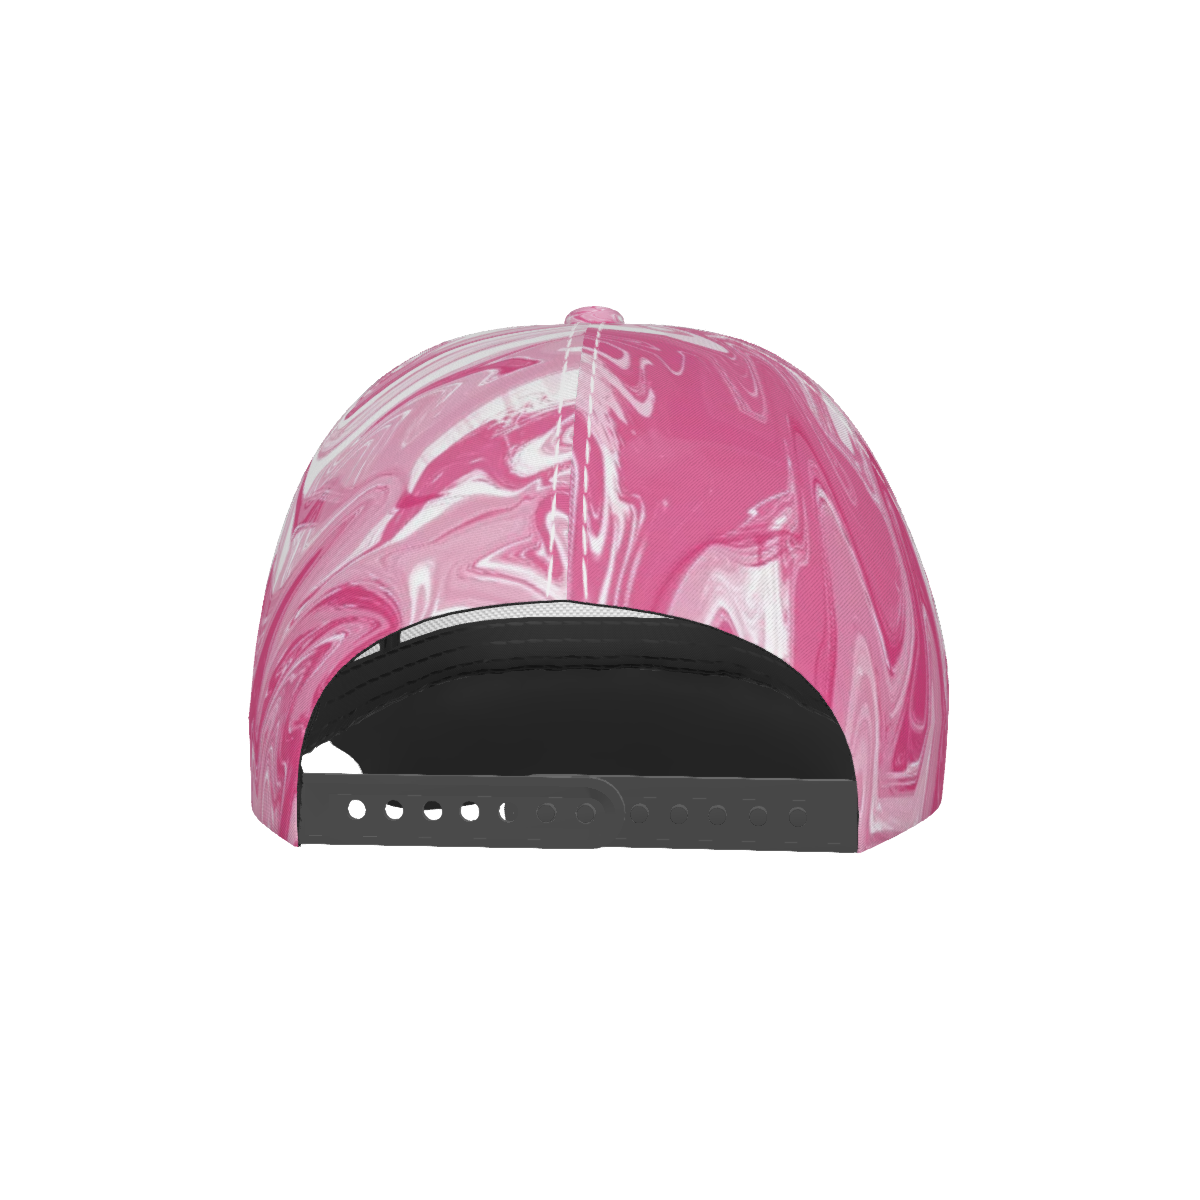 Just Pink Peaked with White Peaked Cap - DromedarShop.com Online Boutique